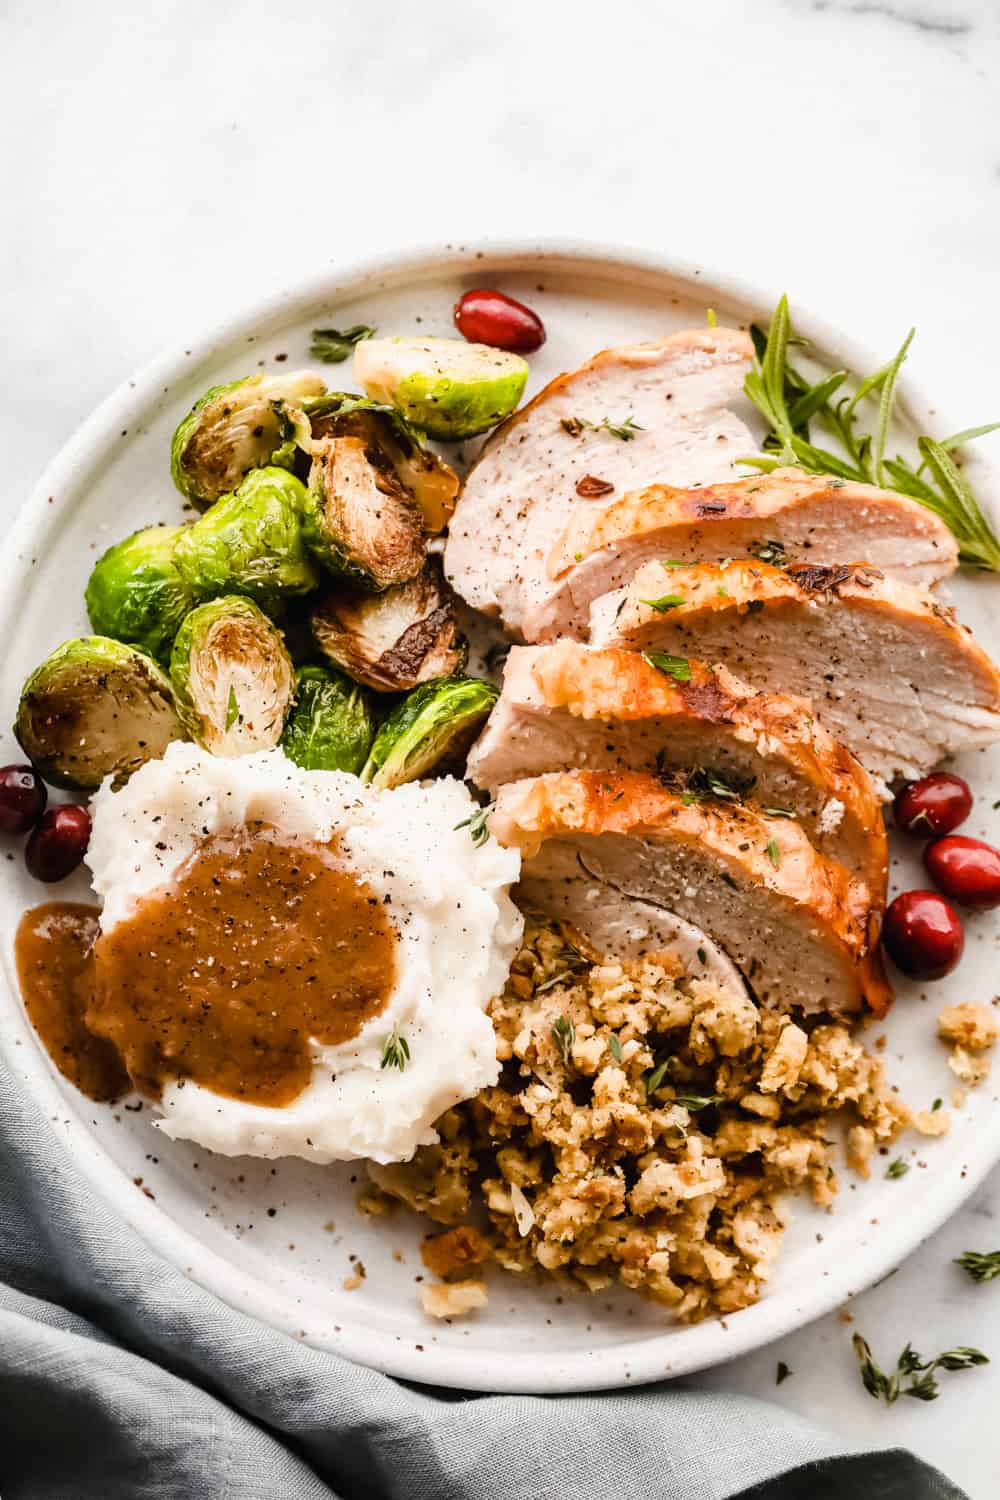 Sliced turkey, mashed potatoes with turkey gravy, brussel sprouts and pilaf all plated together.